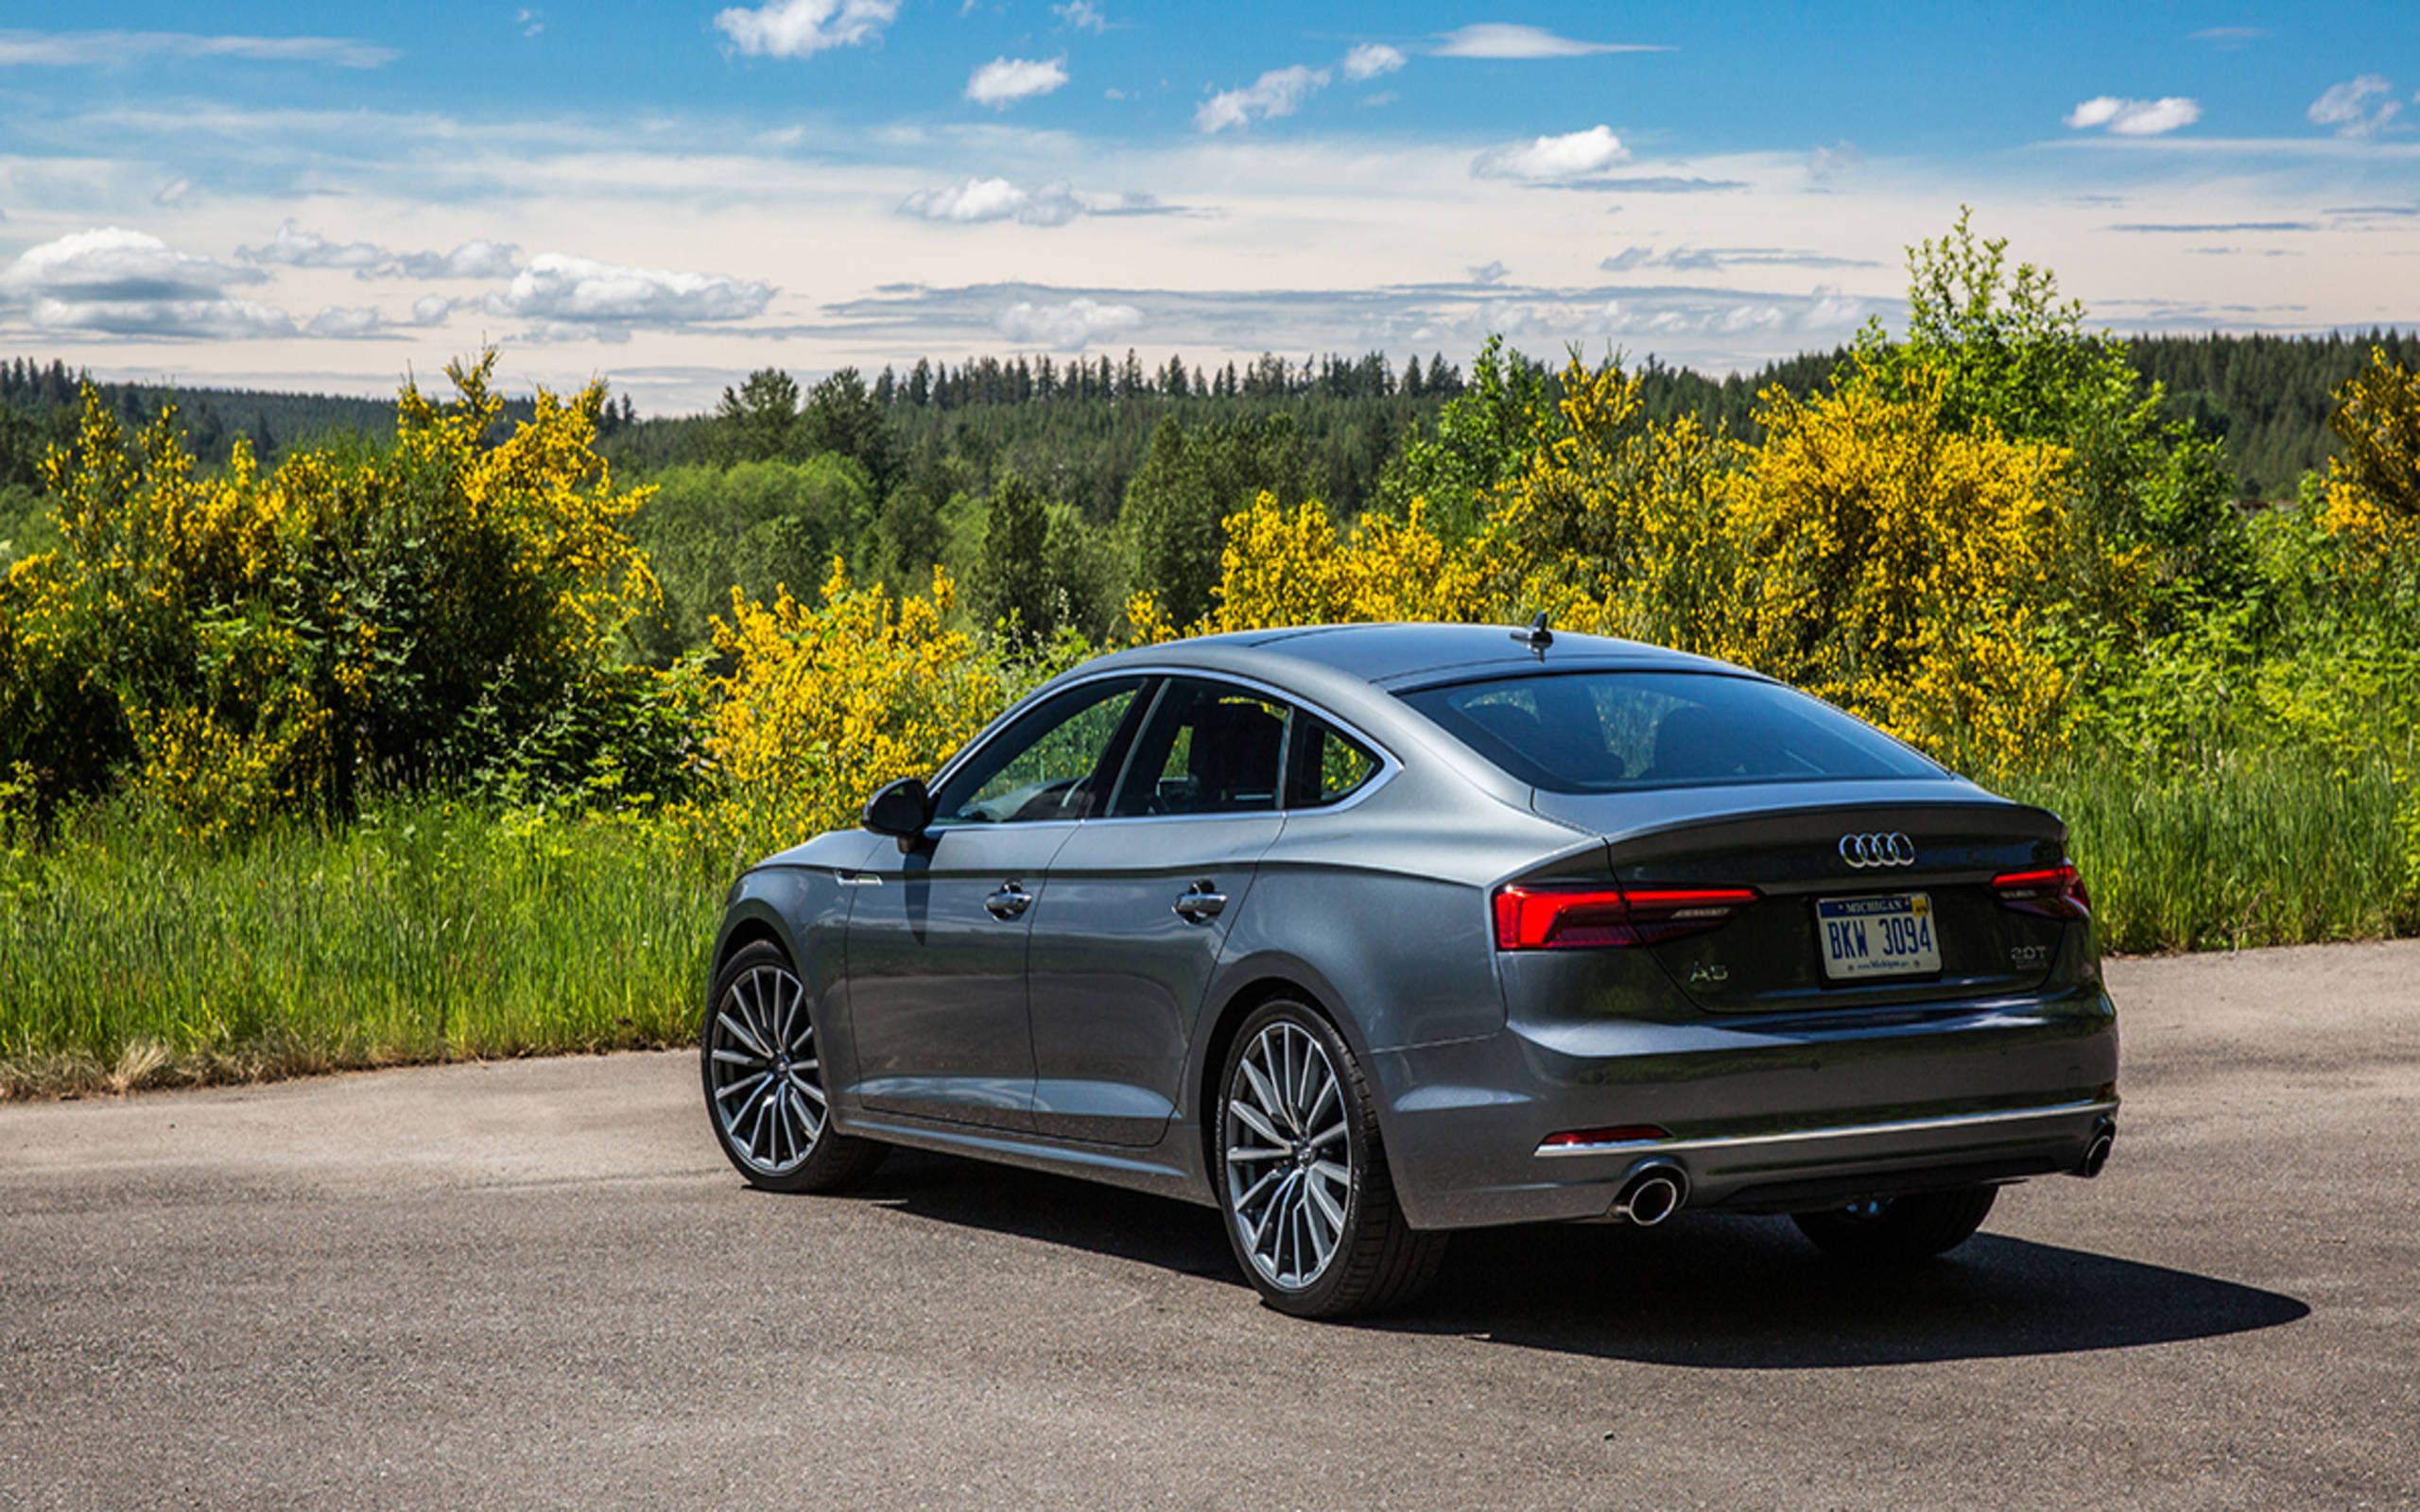 2018 Audi A5 Sportback first drive: The best of both worlds